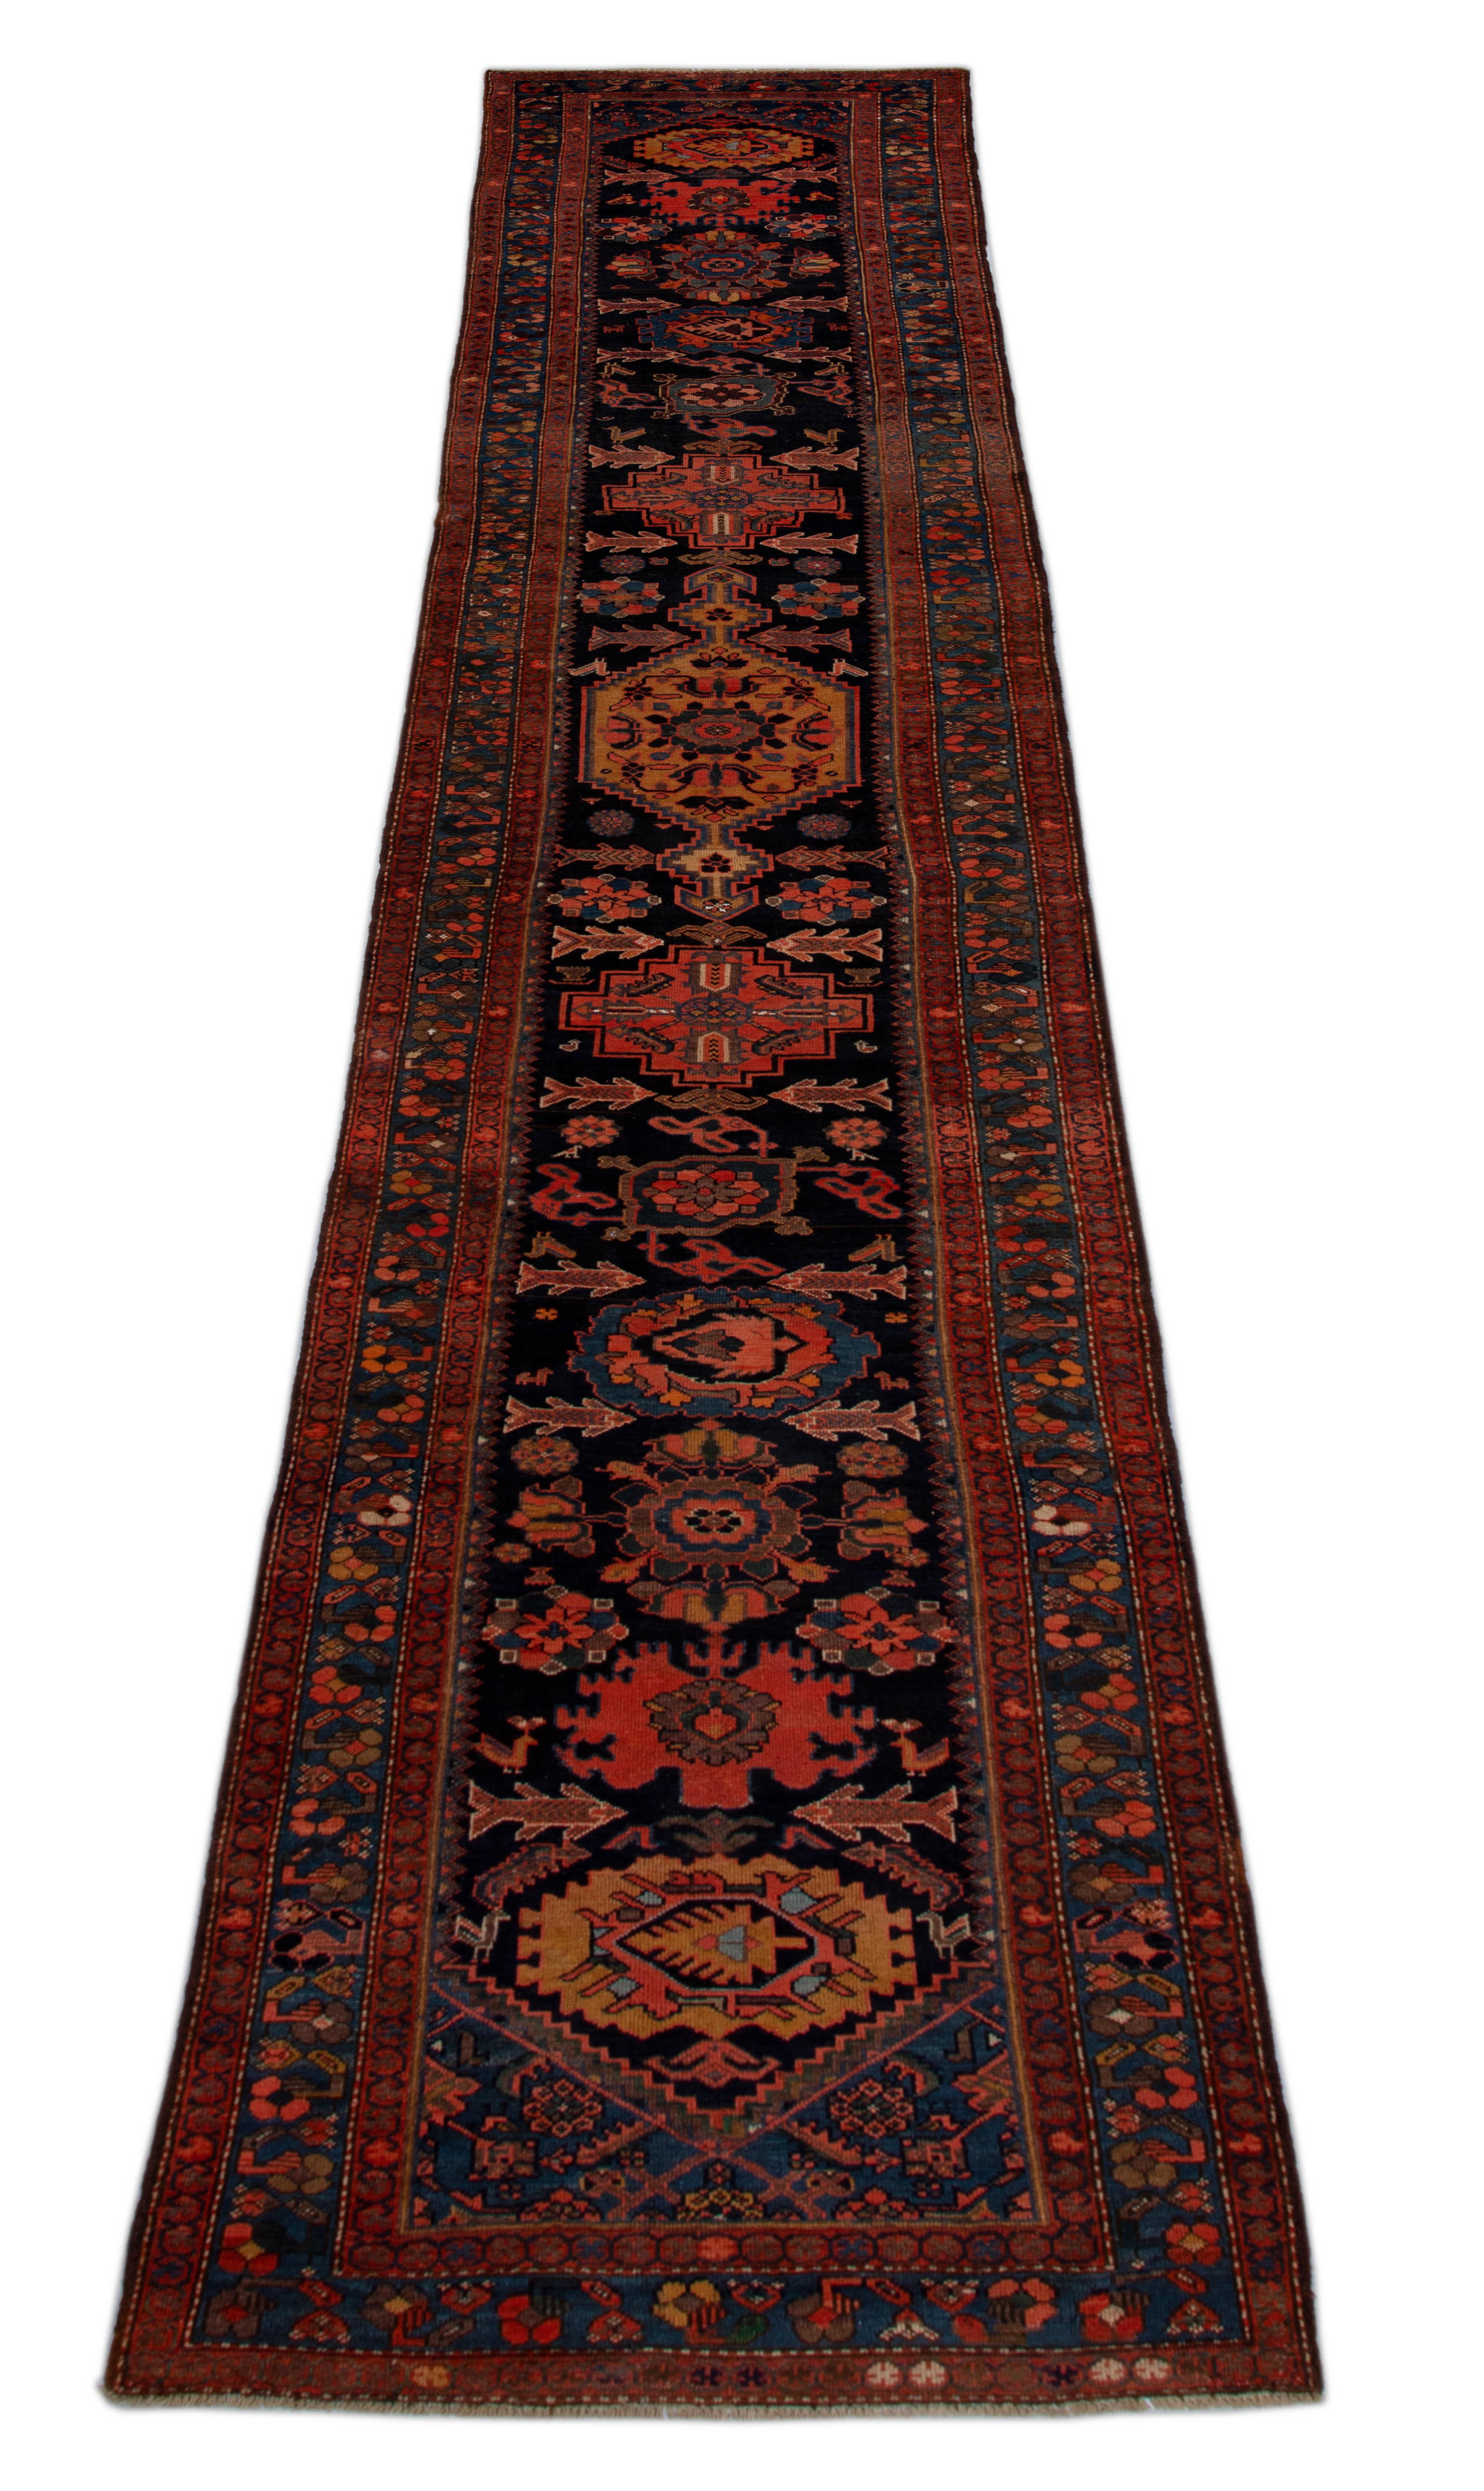 Antique Persian Zanjan Runner Rug in Black and Red with Allover Design Details  In Excellent Condition For Sale In Dallas, TX